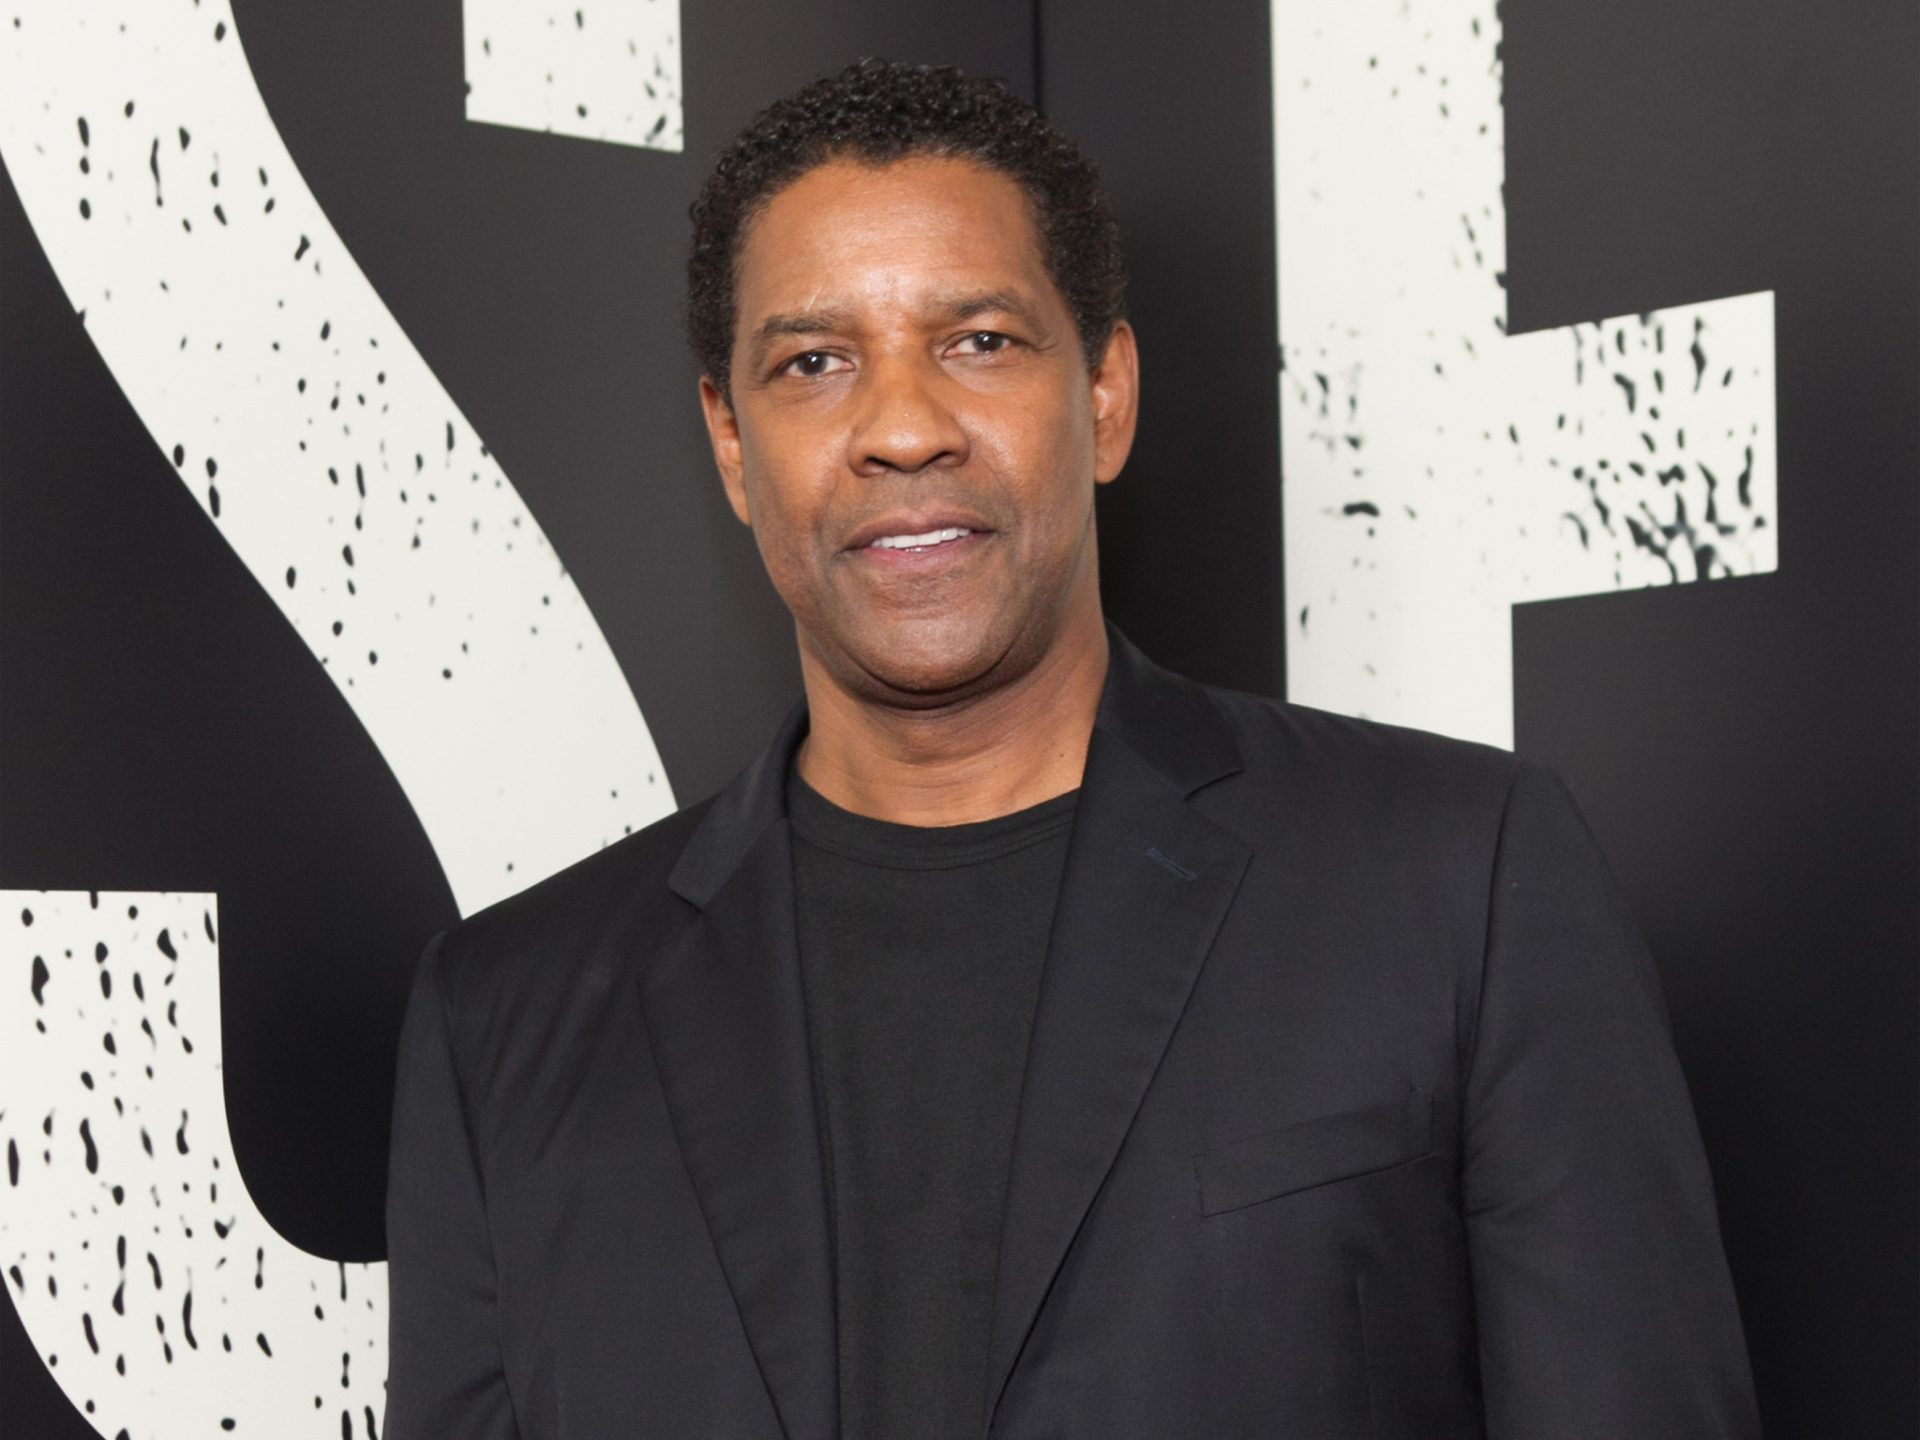 Denzel Washington excited about new project